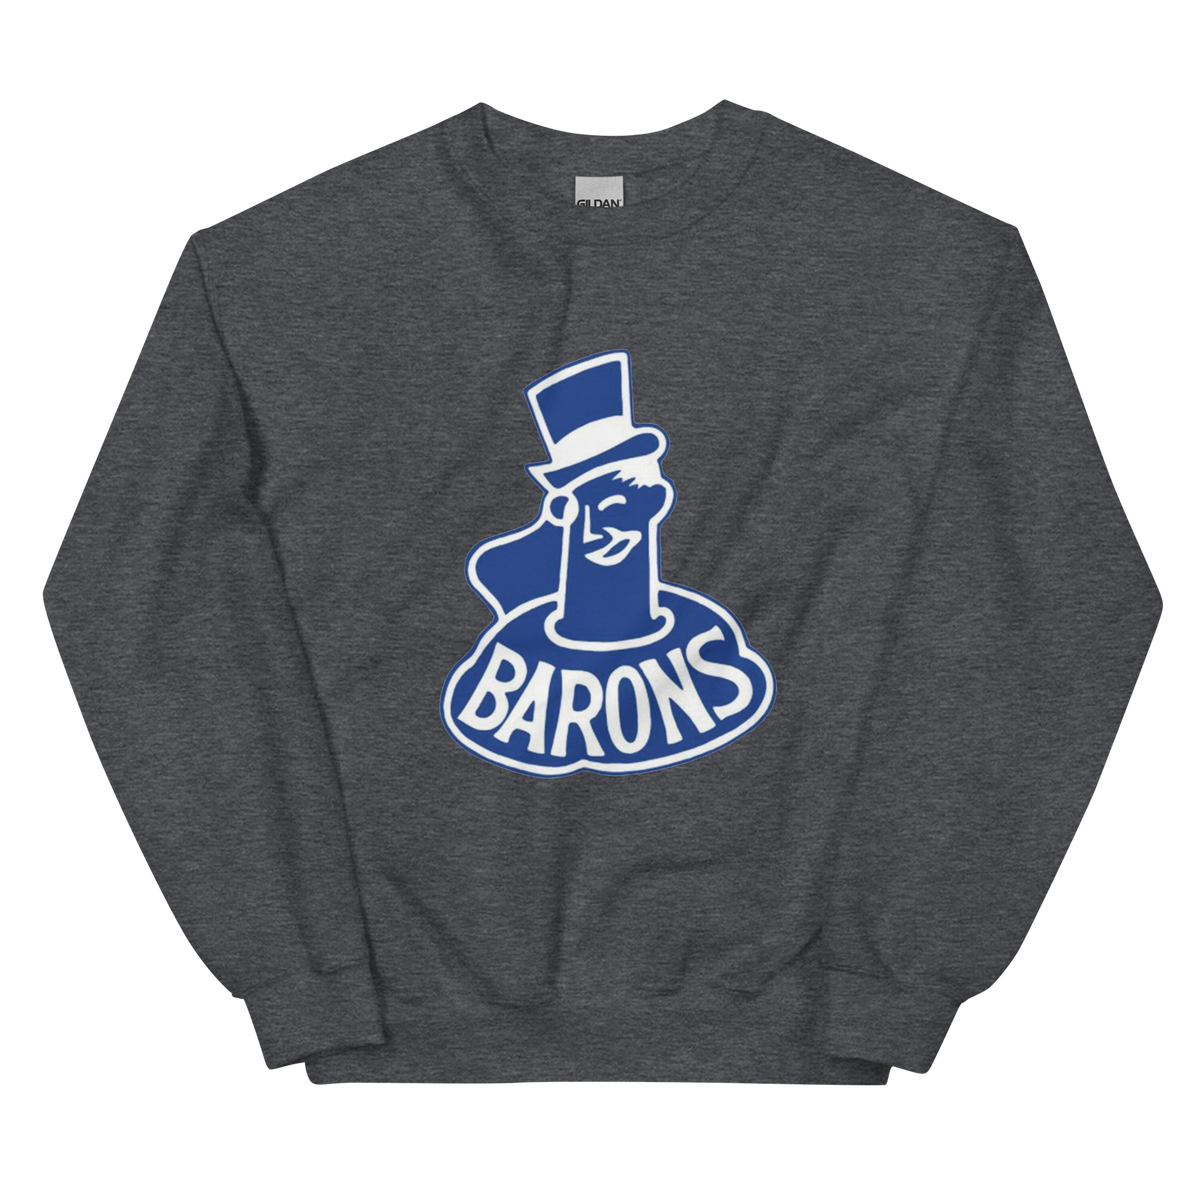 Rustic Logo Cleveland Barons Hockey T-shirt, A Vintage-inspired